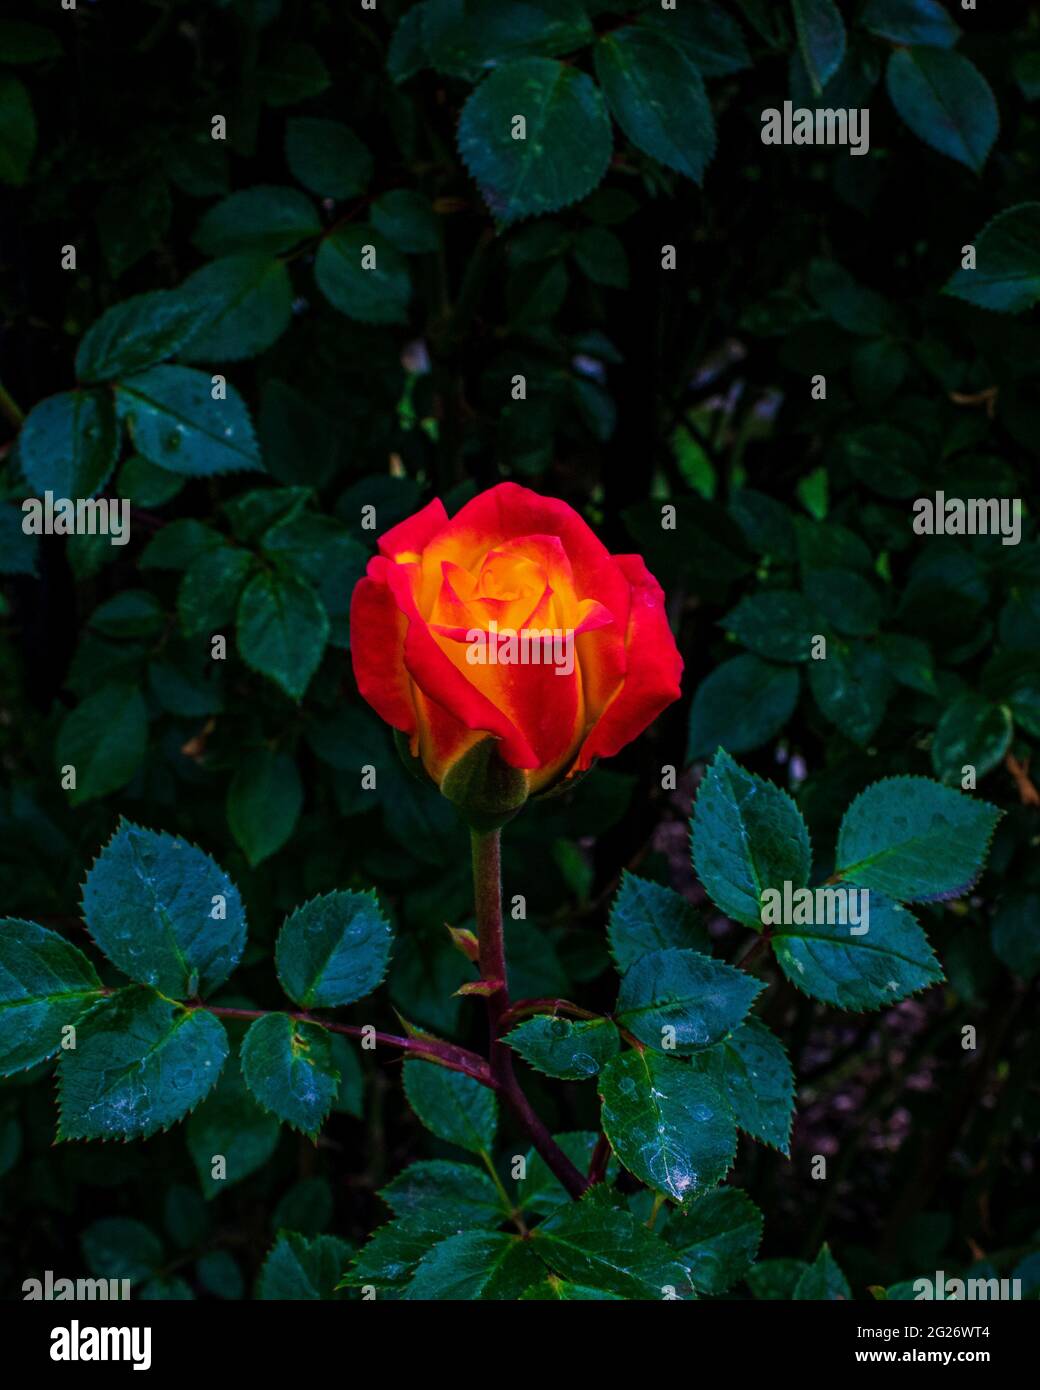 A yellow rose with red tips blossoming in the garden surrounded by dark green leaves Stock Photo